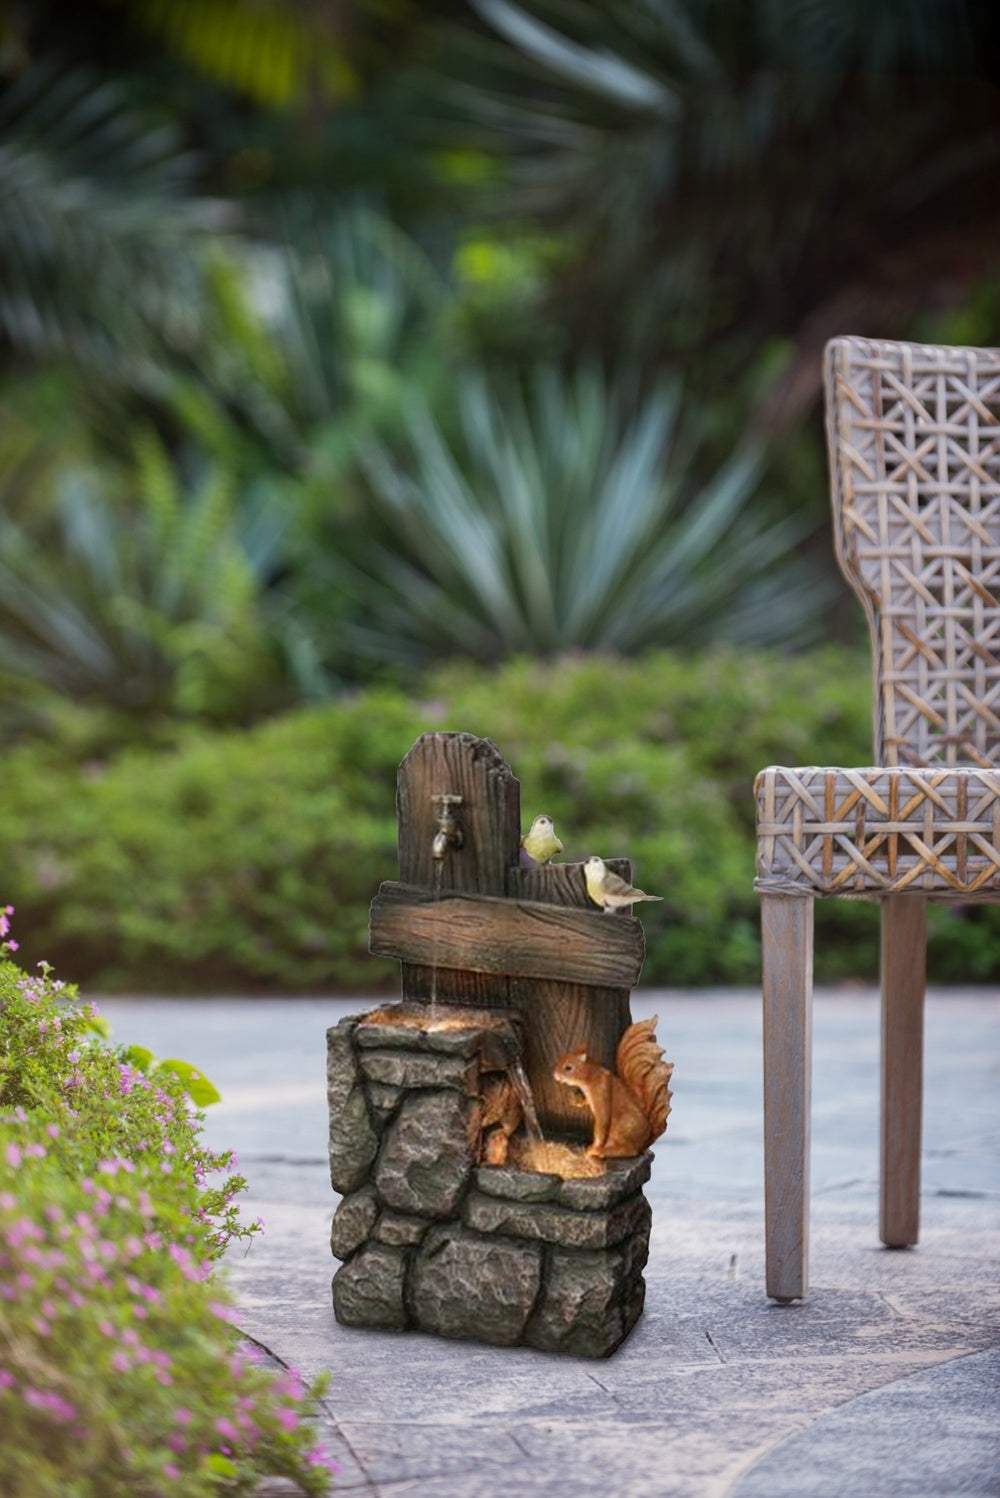 15x14.1x26.4" Decorative Two-Tiered Water Fountain with Woodland Animal Design, Outdoor Fountain with Light and Pump